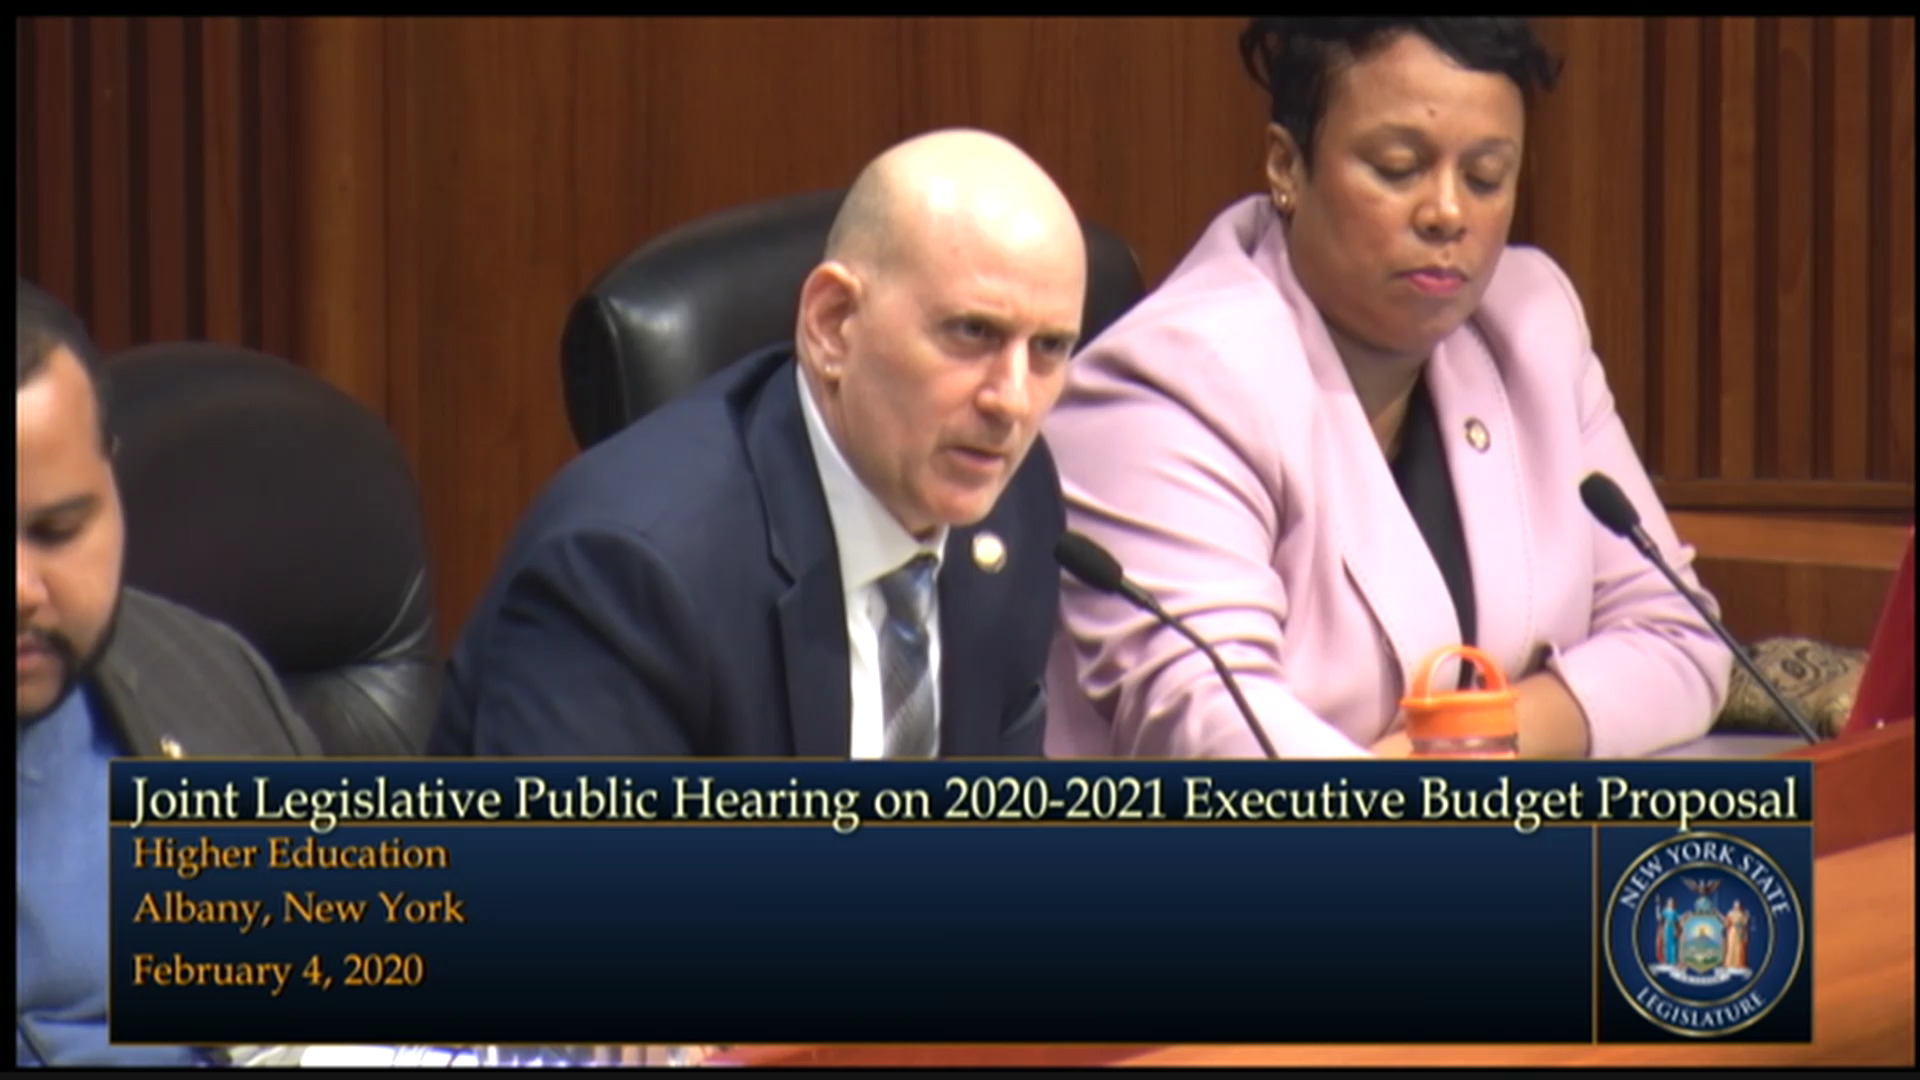 CUNY Chancellor Testifies During Higher Education Budget Hearing